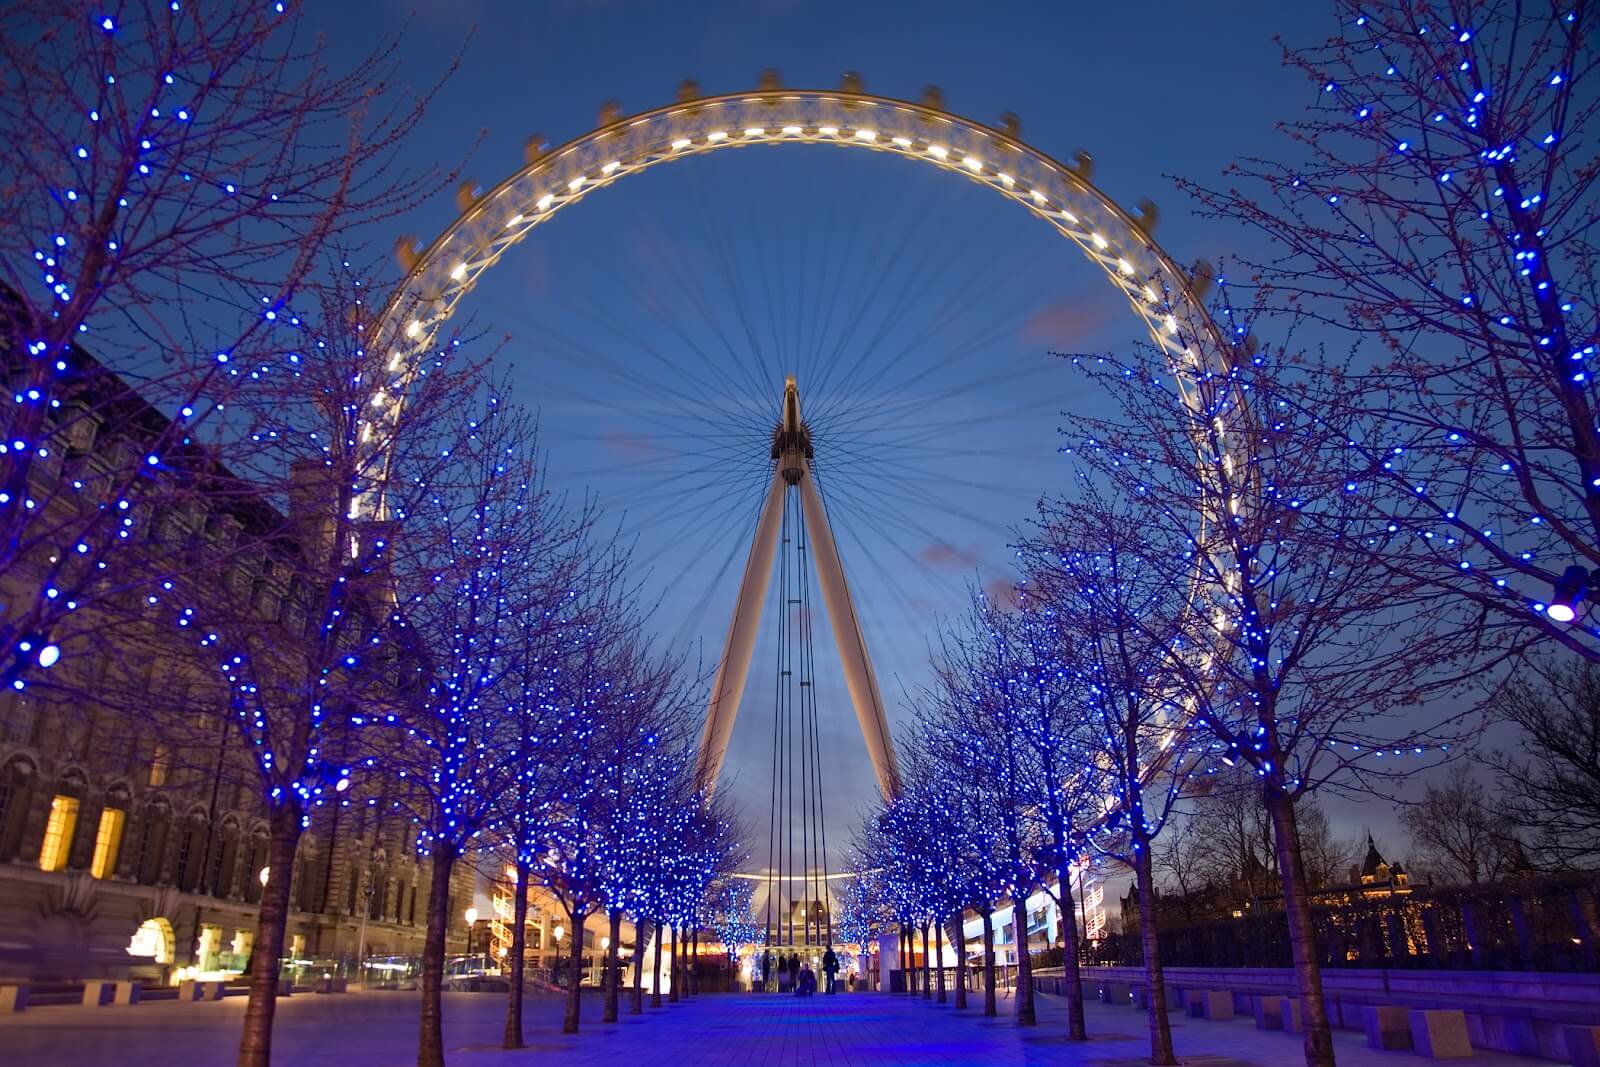 Winter UK-London, Manchester, Birmingham Holiday Travel & Tour Package